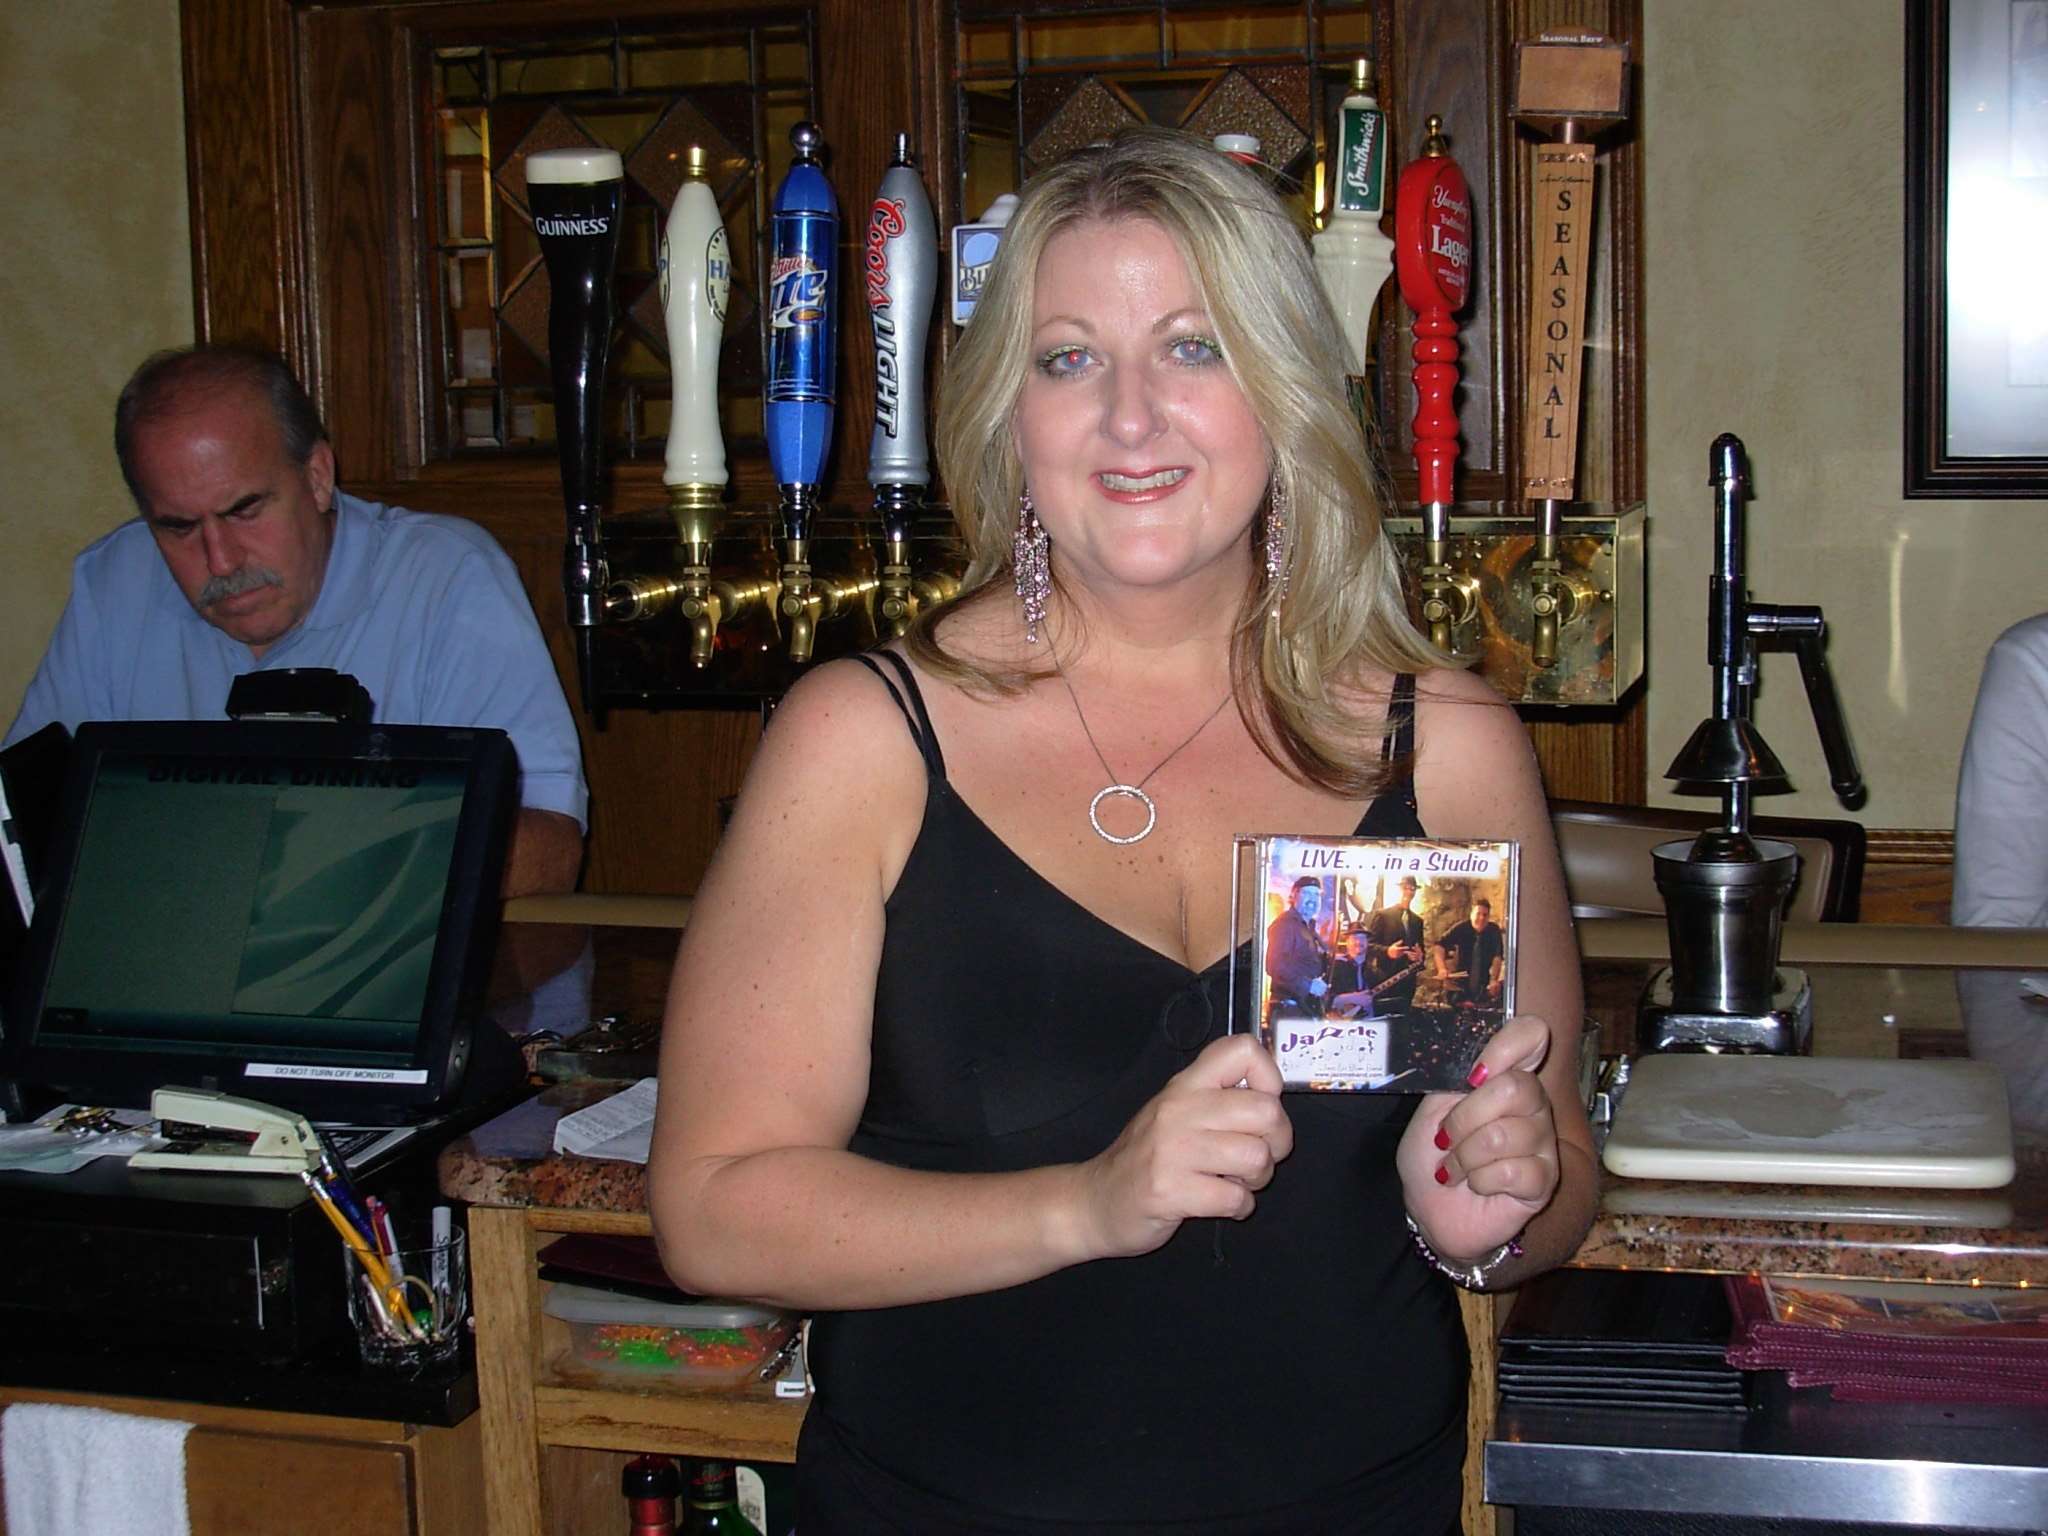 CD winner at the Roosevelt Tavern..Melissa ...one of the wonderful ladies from behind the bar at the Roosevelt
